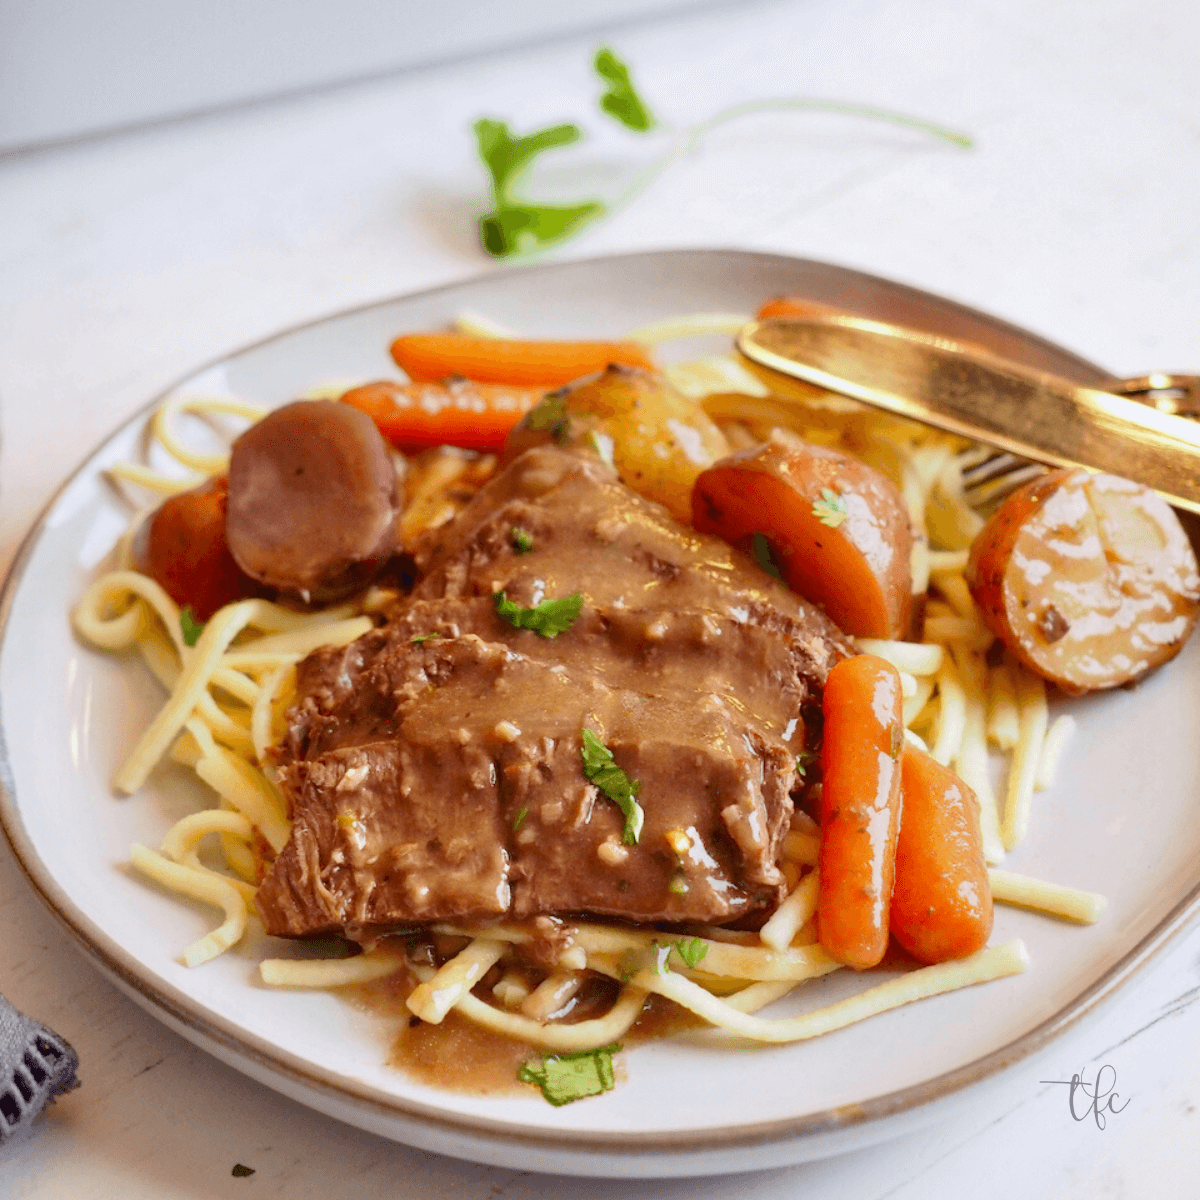 Crockpot London Broil Recipe sliced london broil on a plate of egg noodles smothered in rich gravy with carrots and potatoes.